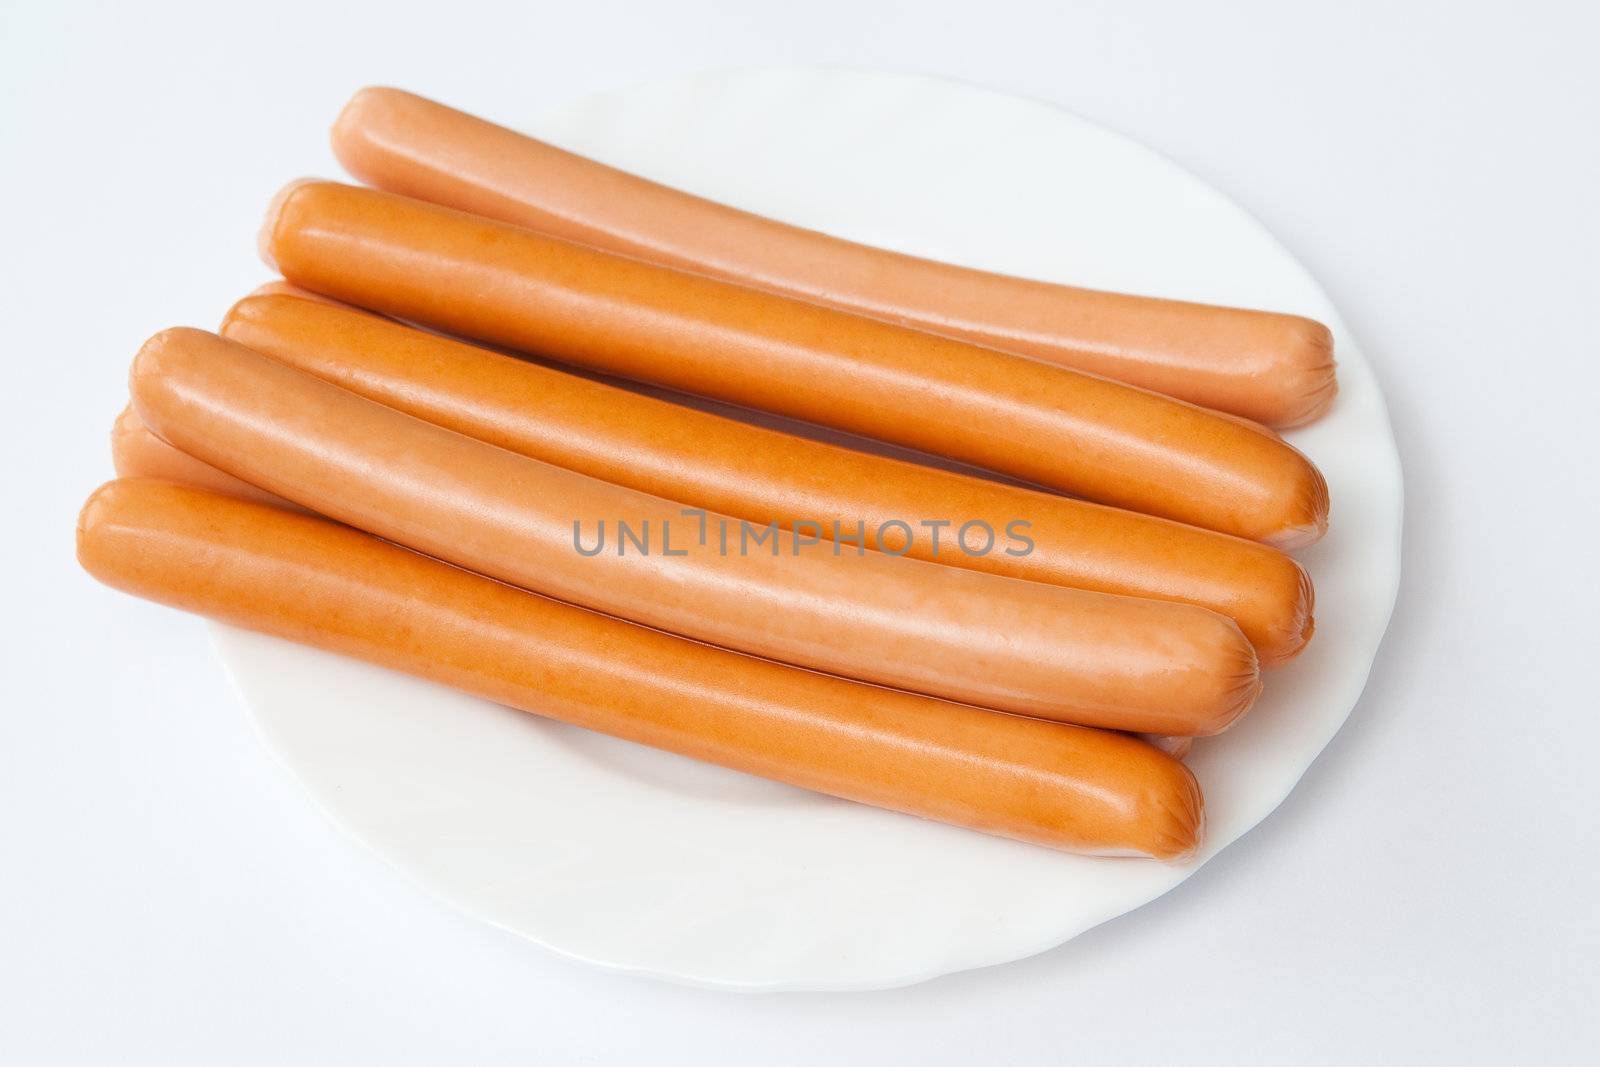 Sausages on the white plate